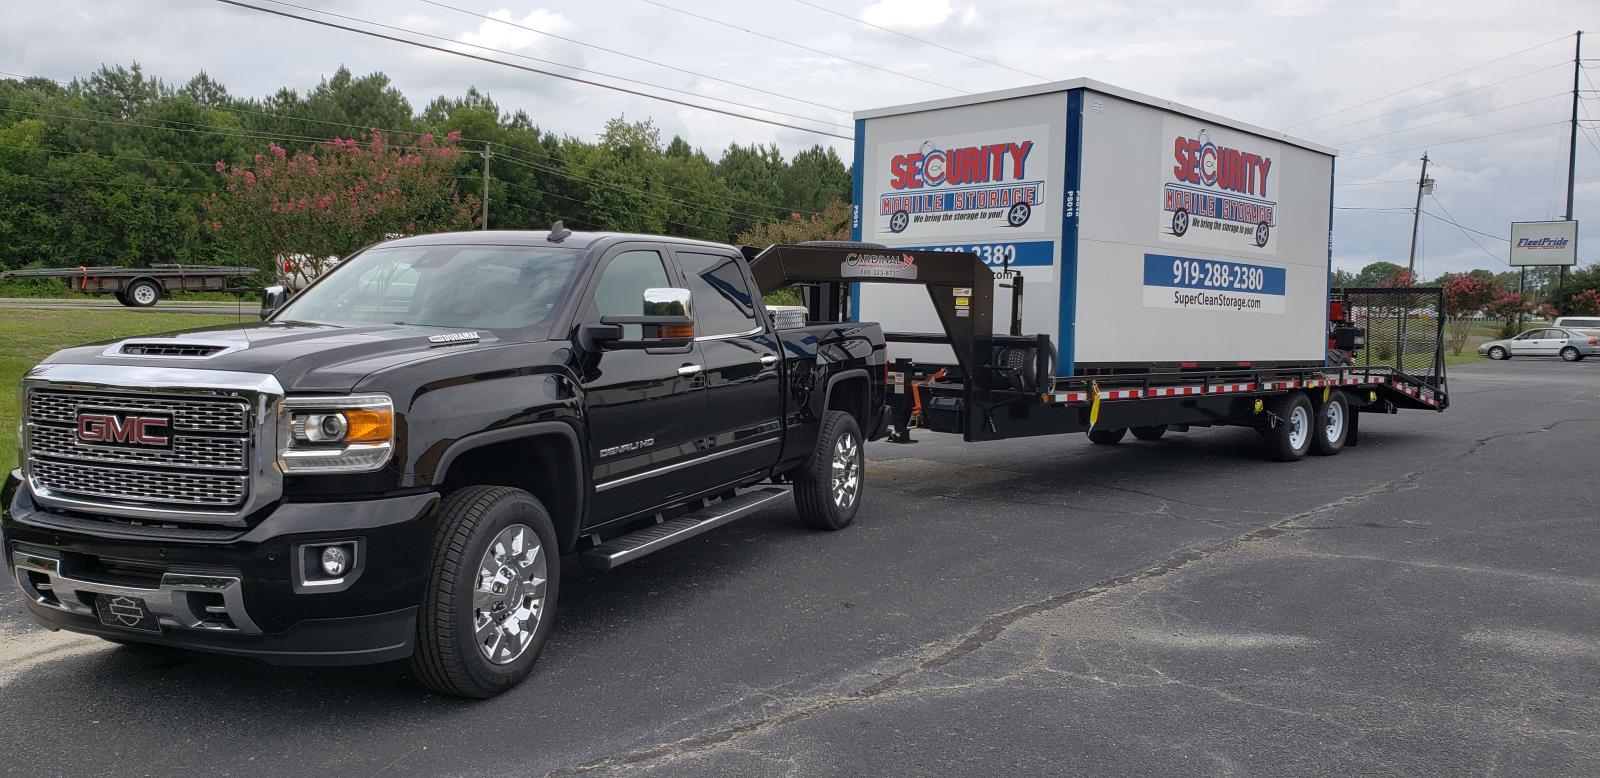 Transporting Security Mobile Storage unit